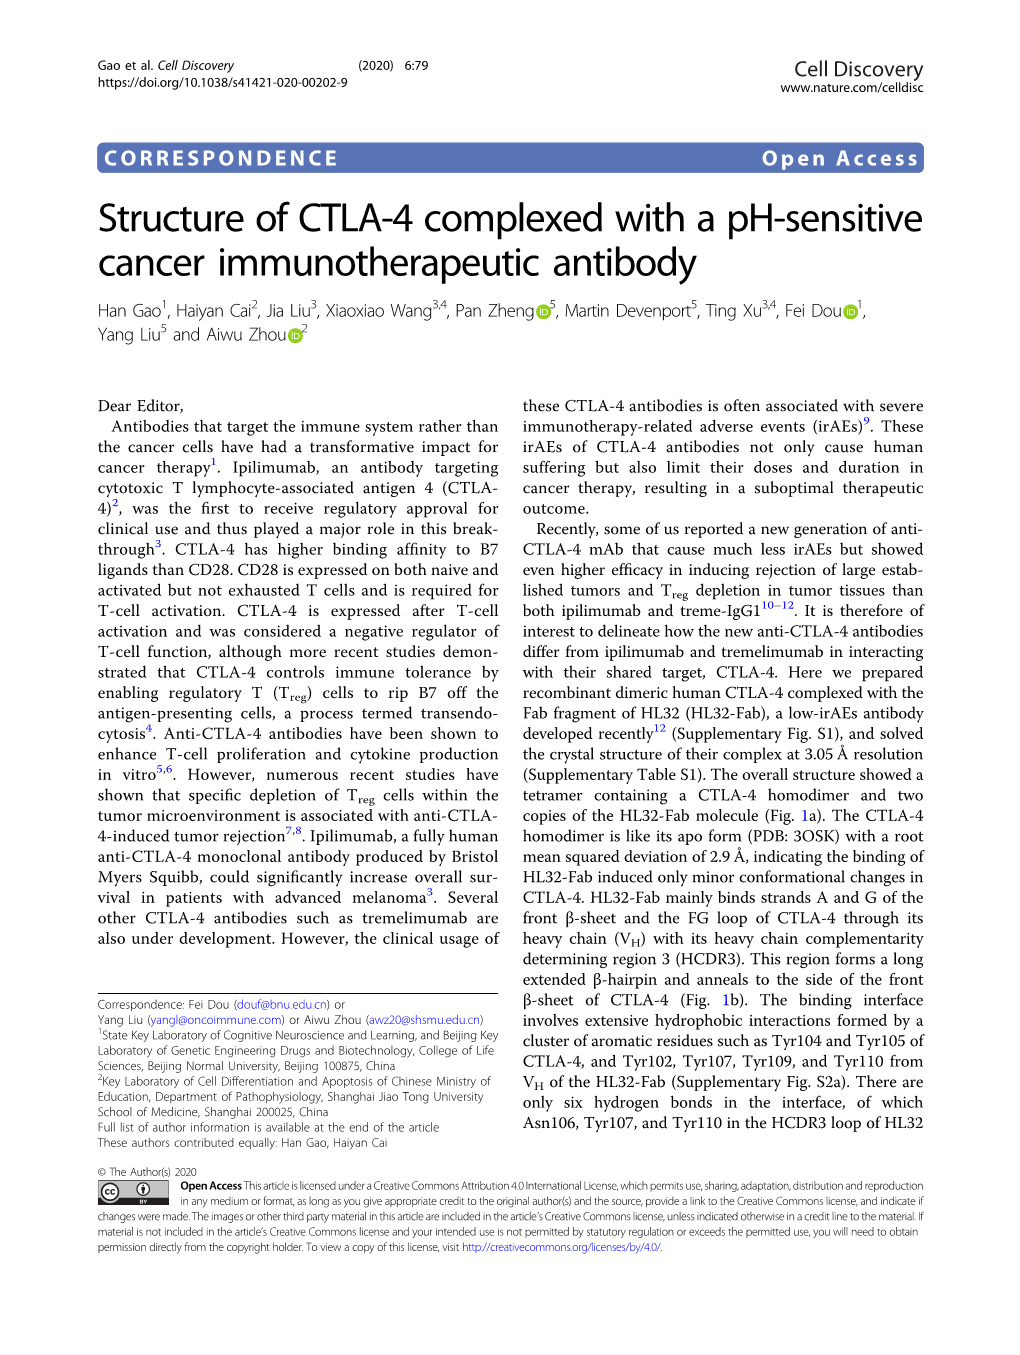 Structure of CTLA-4 Complexed with a Ph-Sensitive Cancer